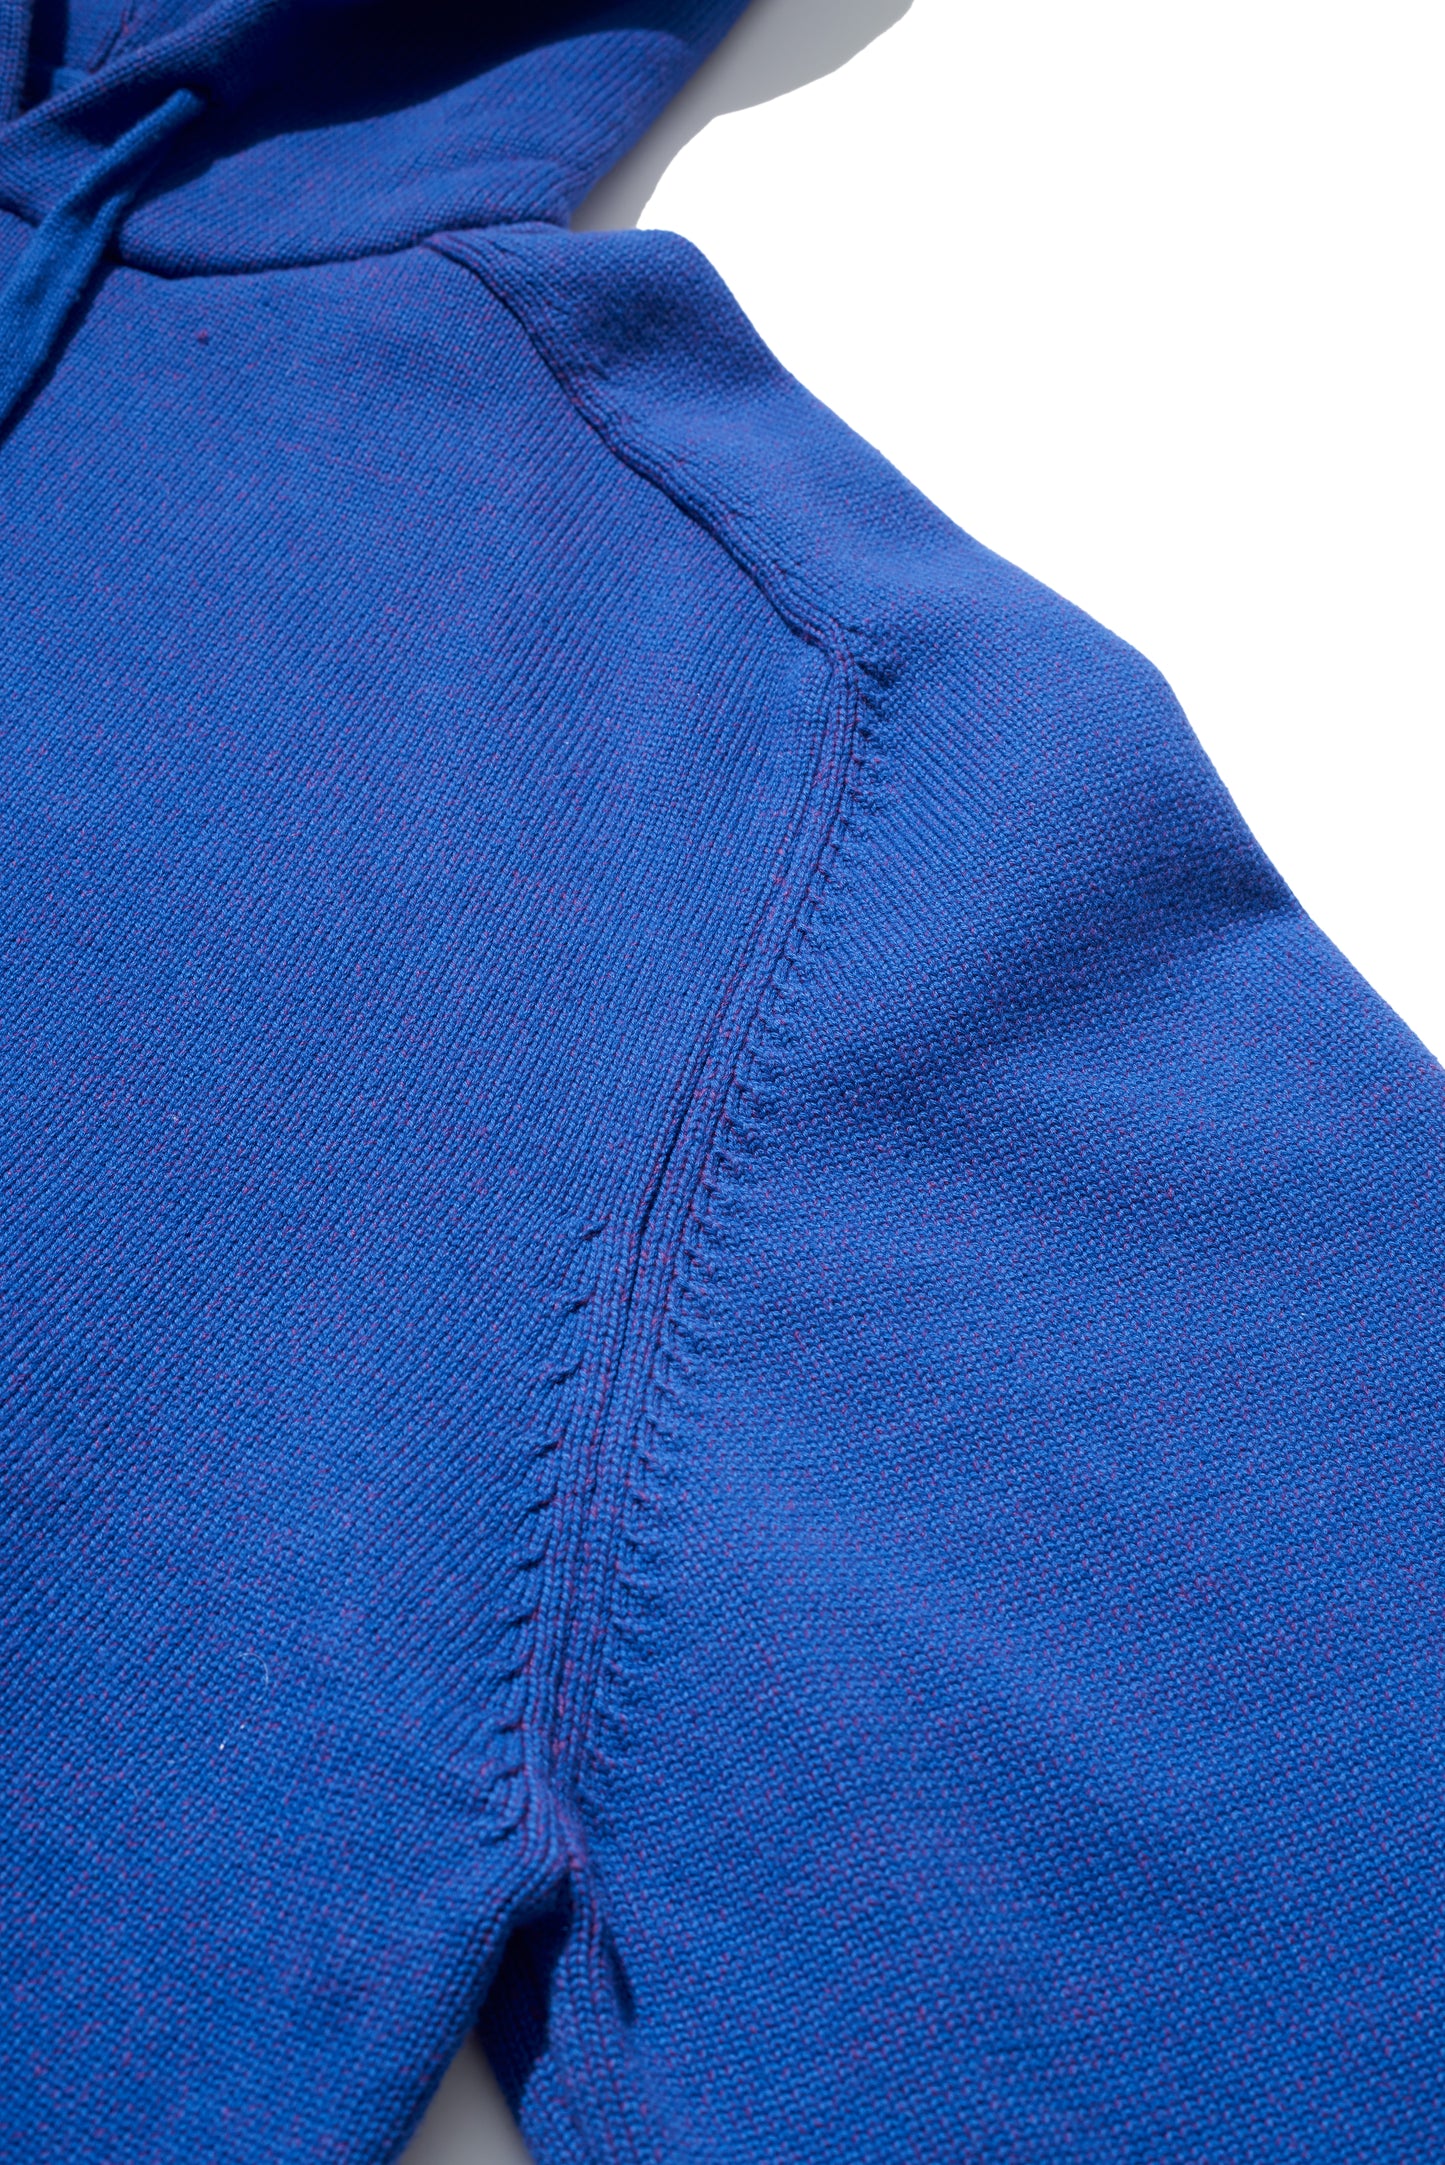 RESEARCHED  HOODED SWEATER
/ C.YARN / PLATING STITCH